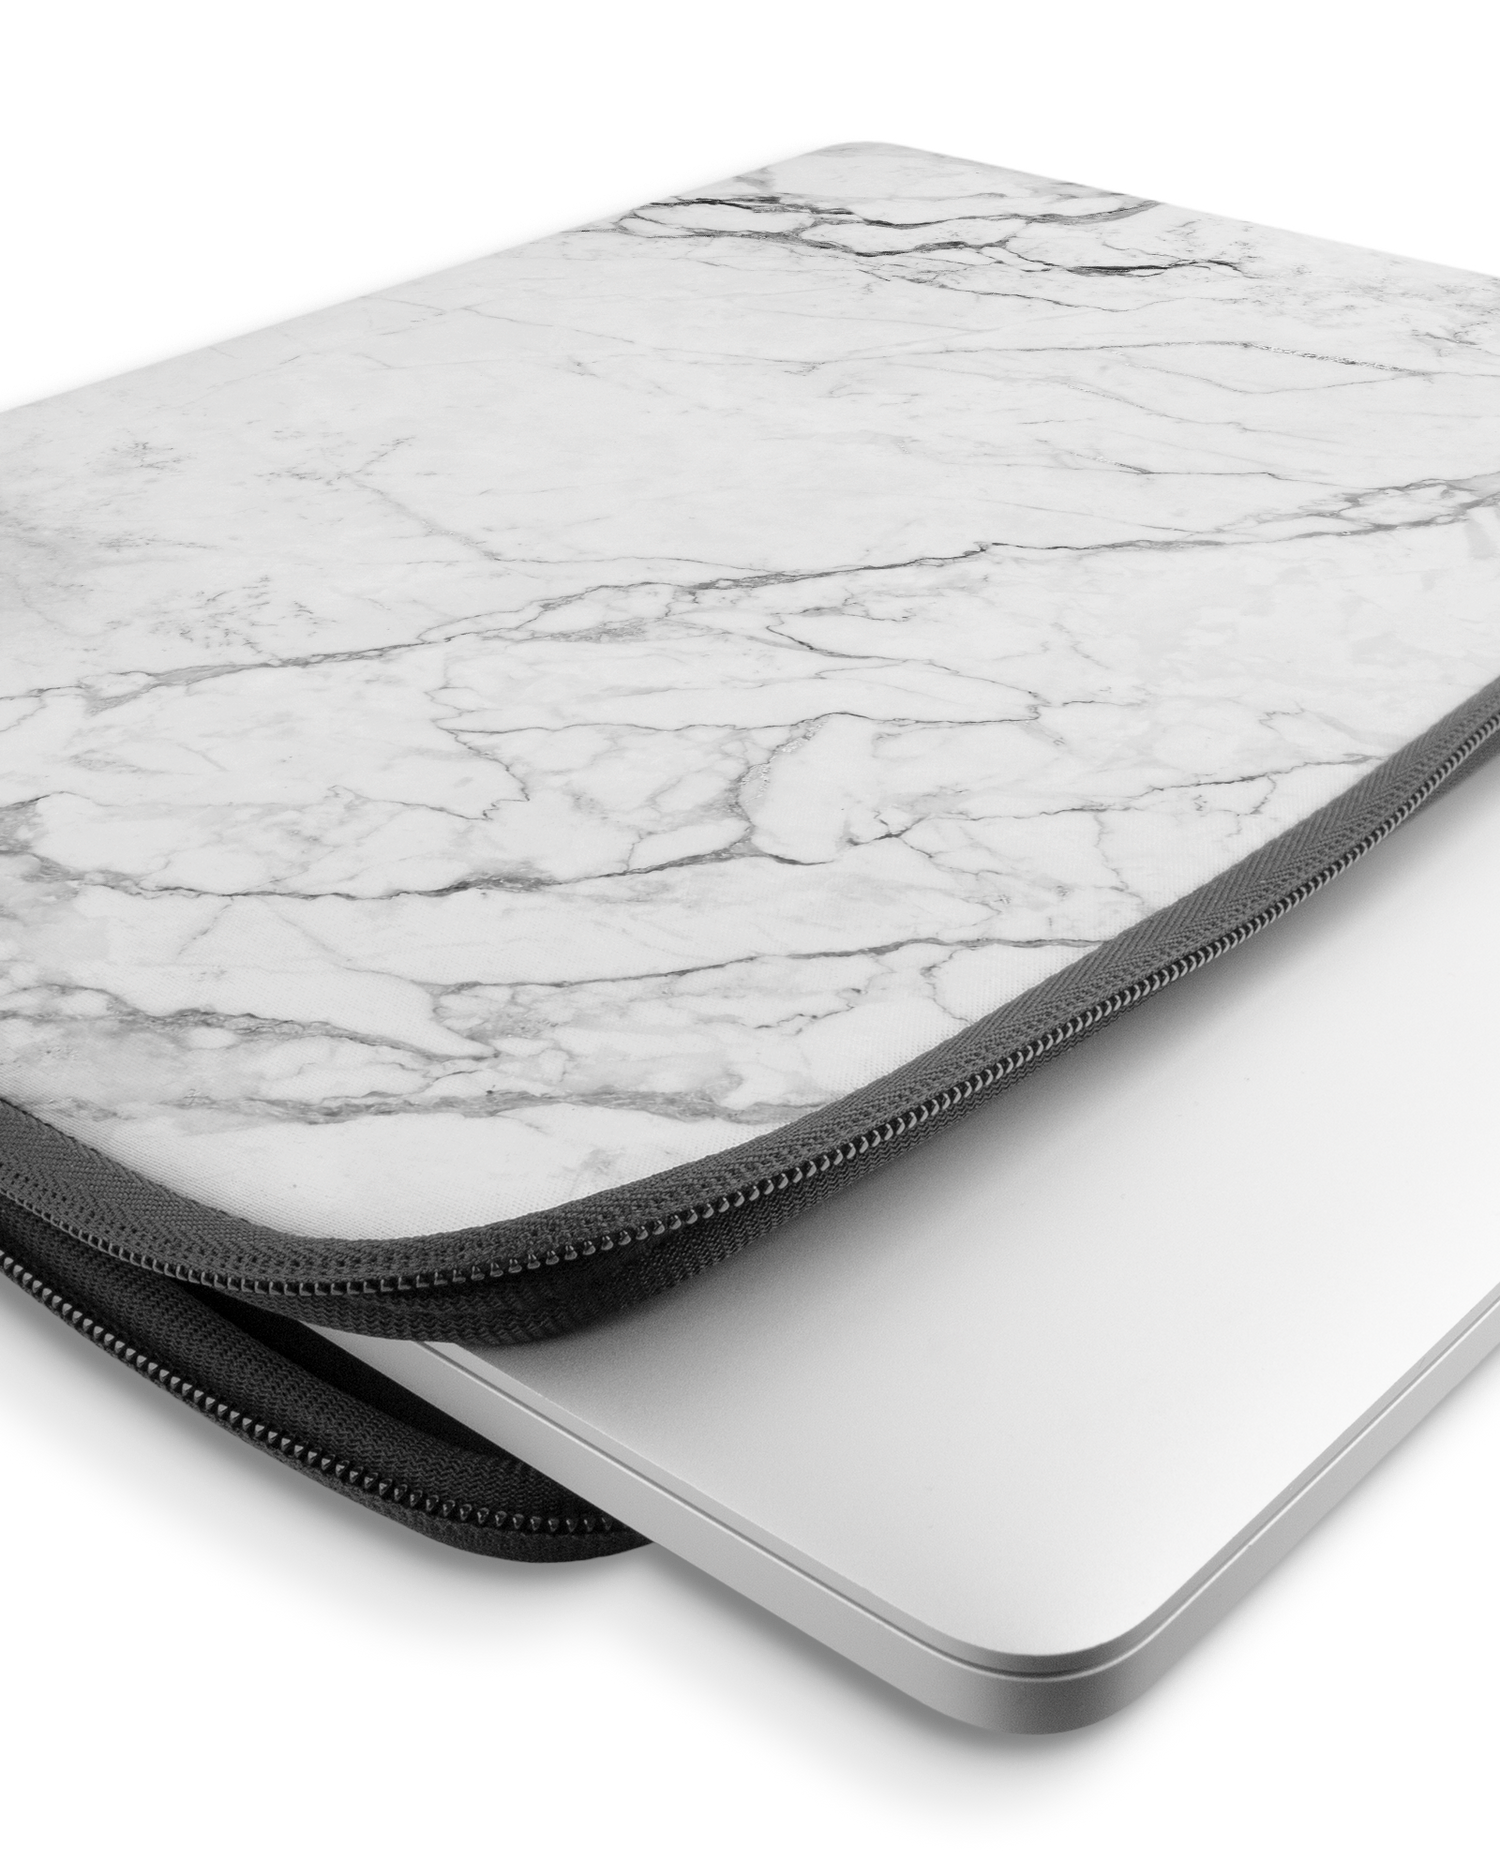 White Marble Laptop Case 15-16 inch with device inside